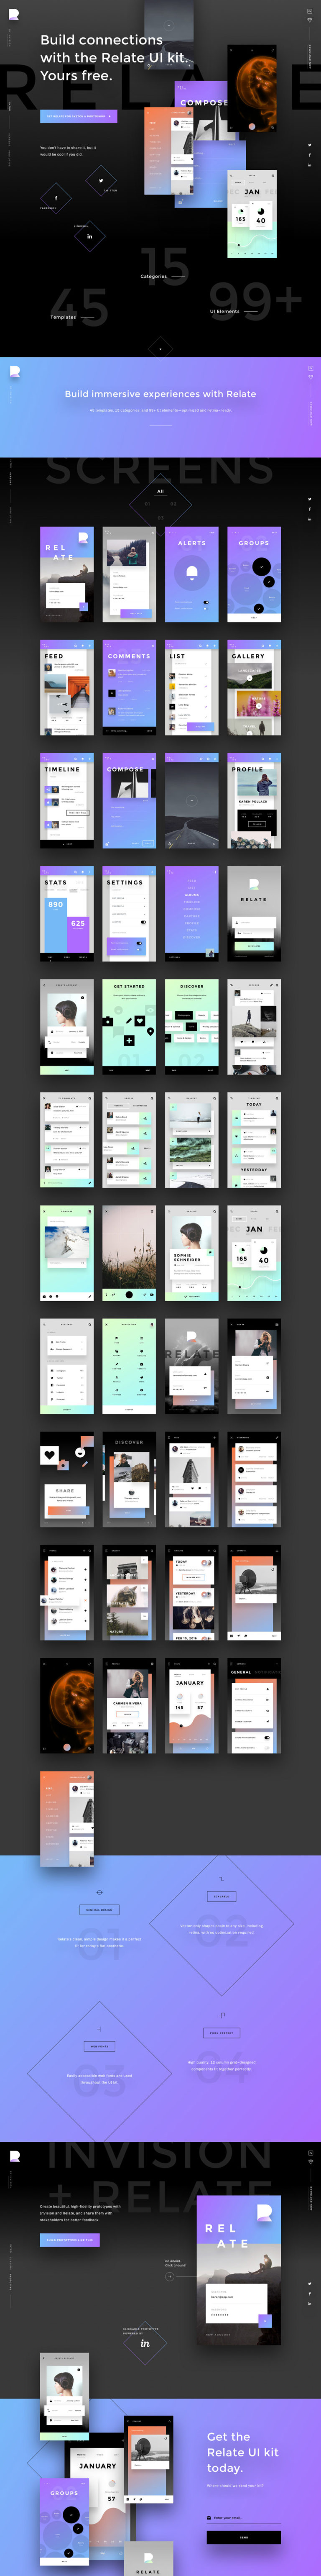 Download Relate UI Kit by InVision | Free Mockups, Best Free PSD ...